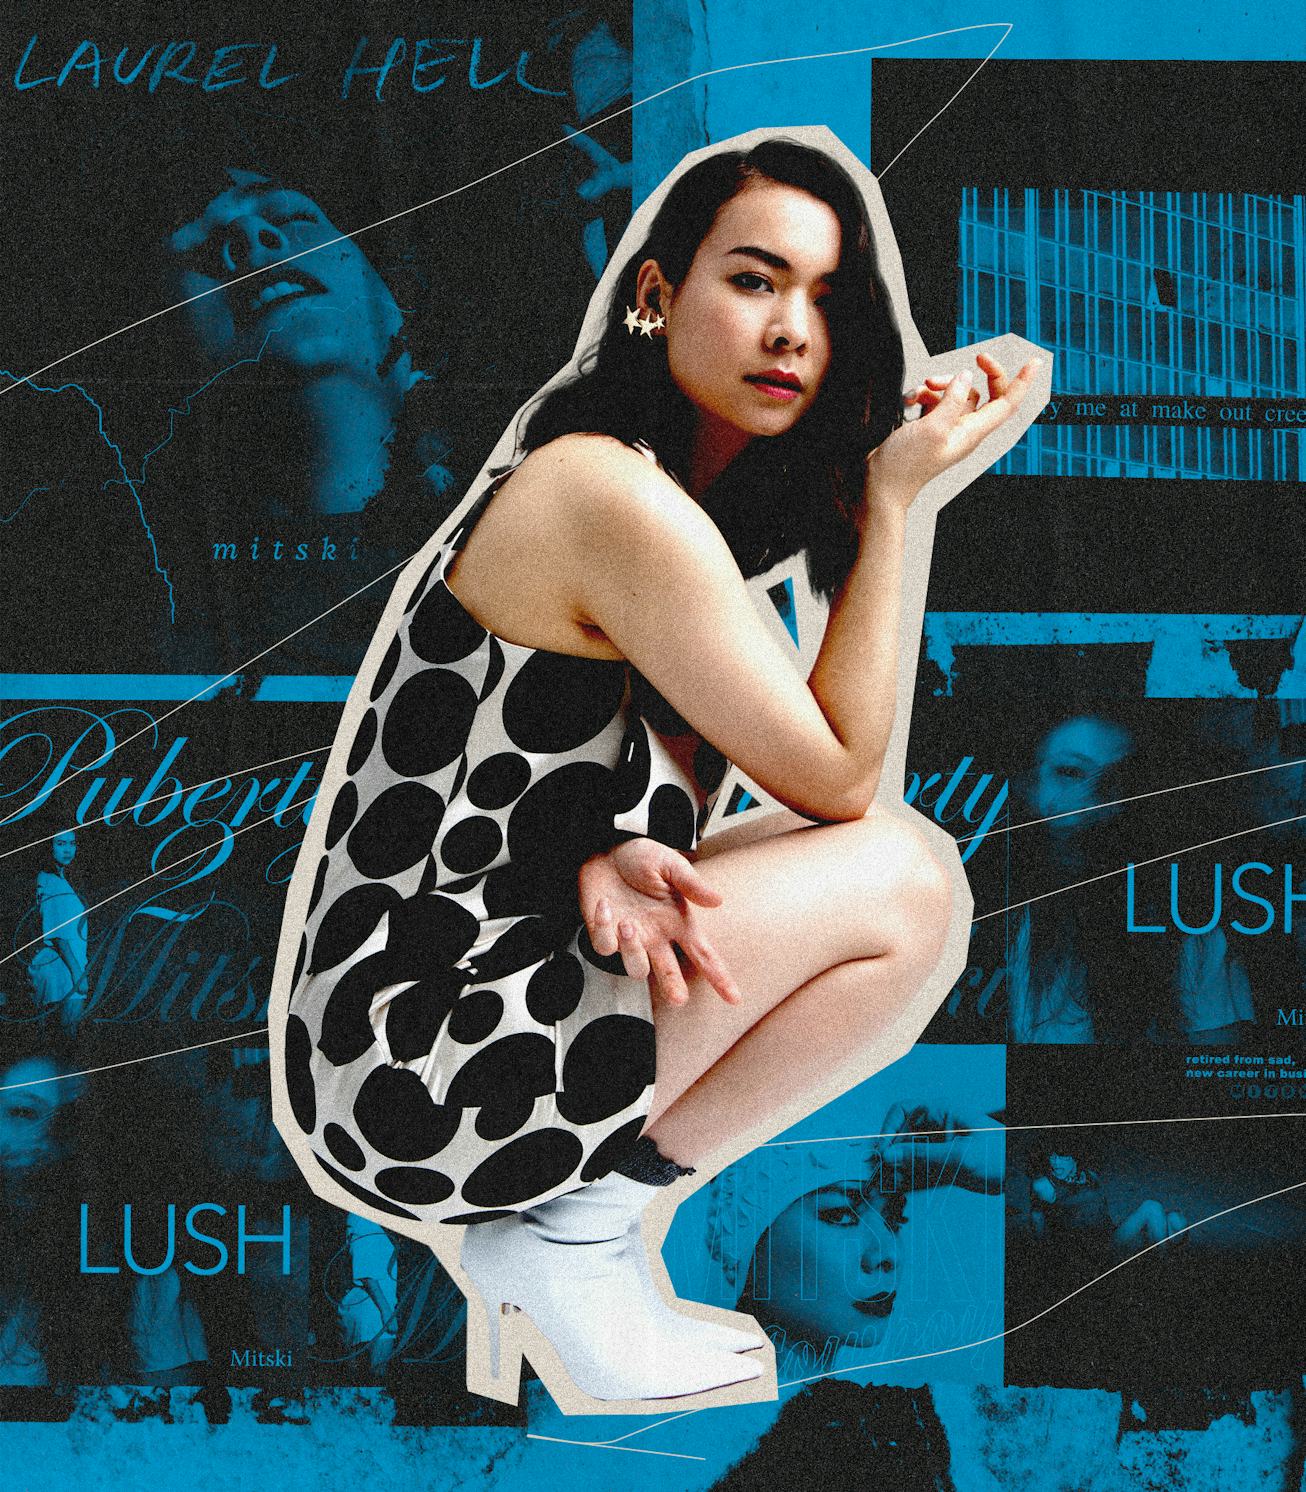 Mitski's Albums Ranked, From 'Lush' To 'Laurel Hell'